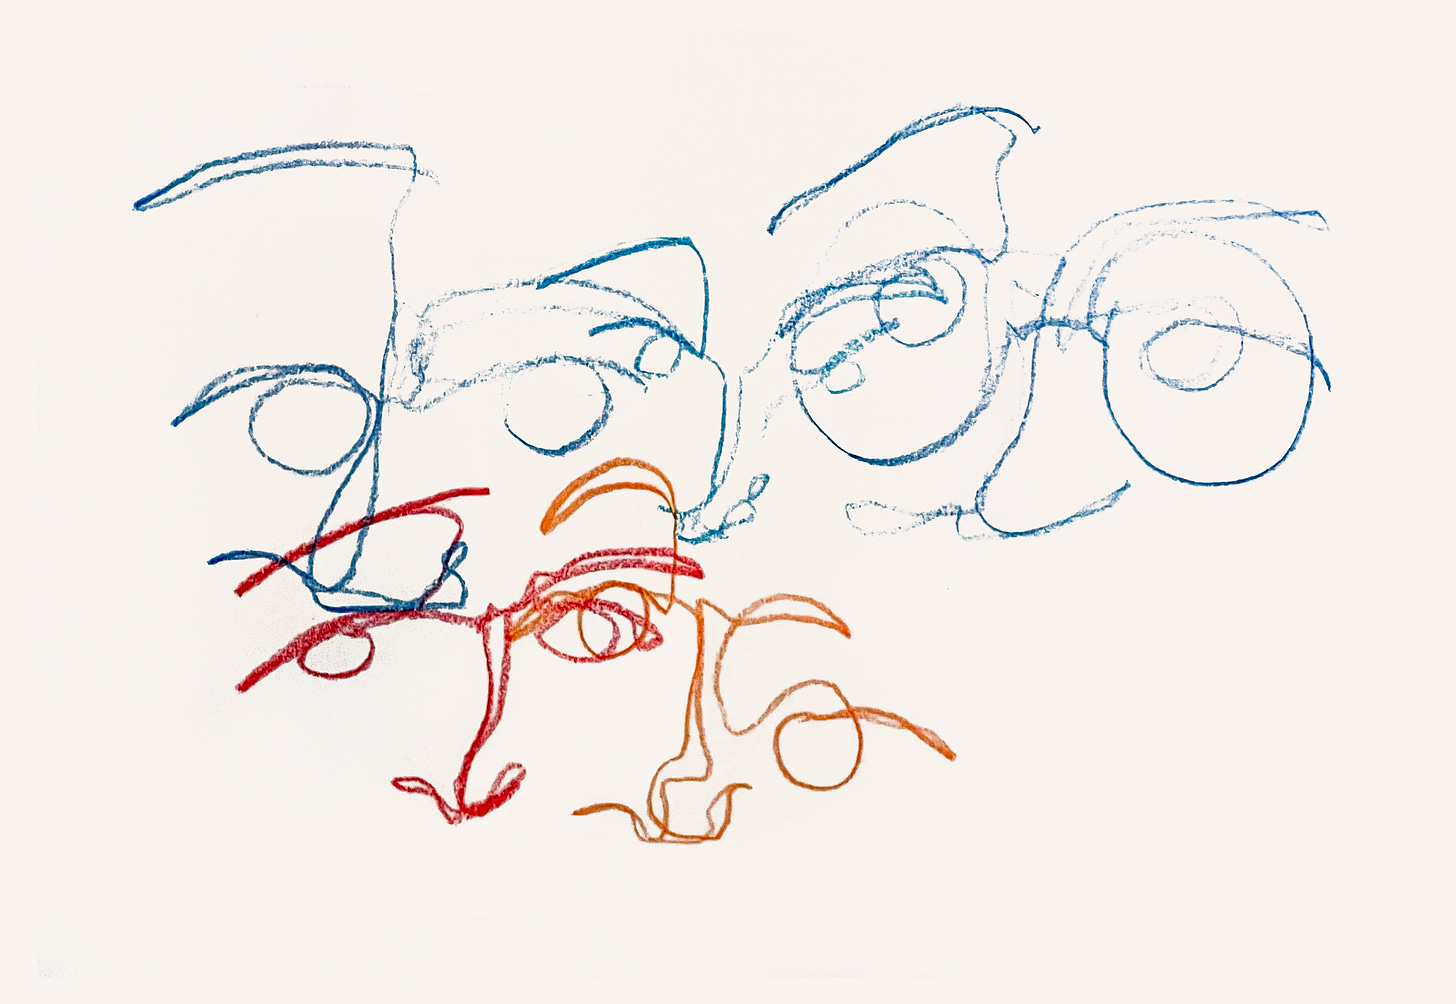 a blind contour drawing of faces by me